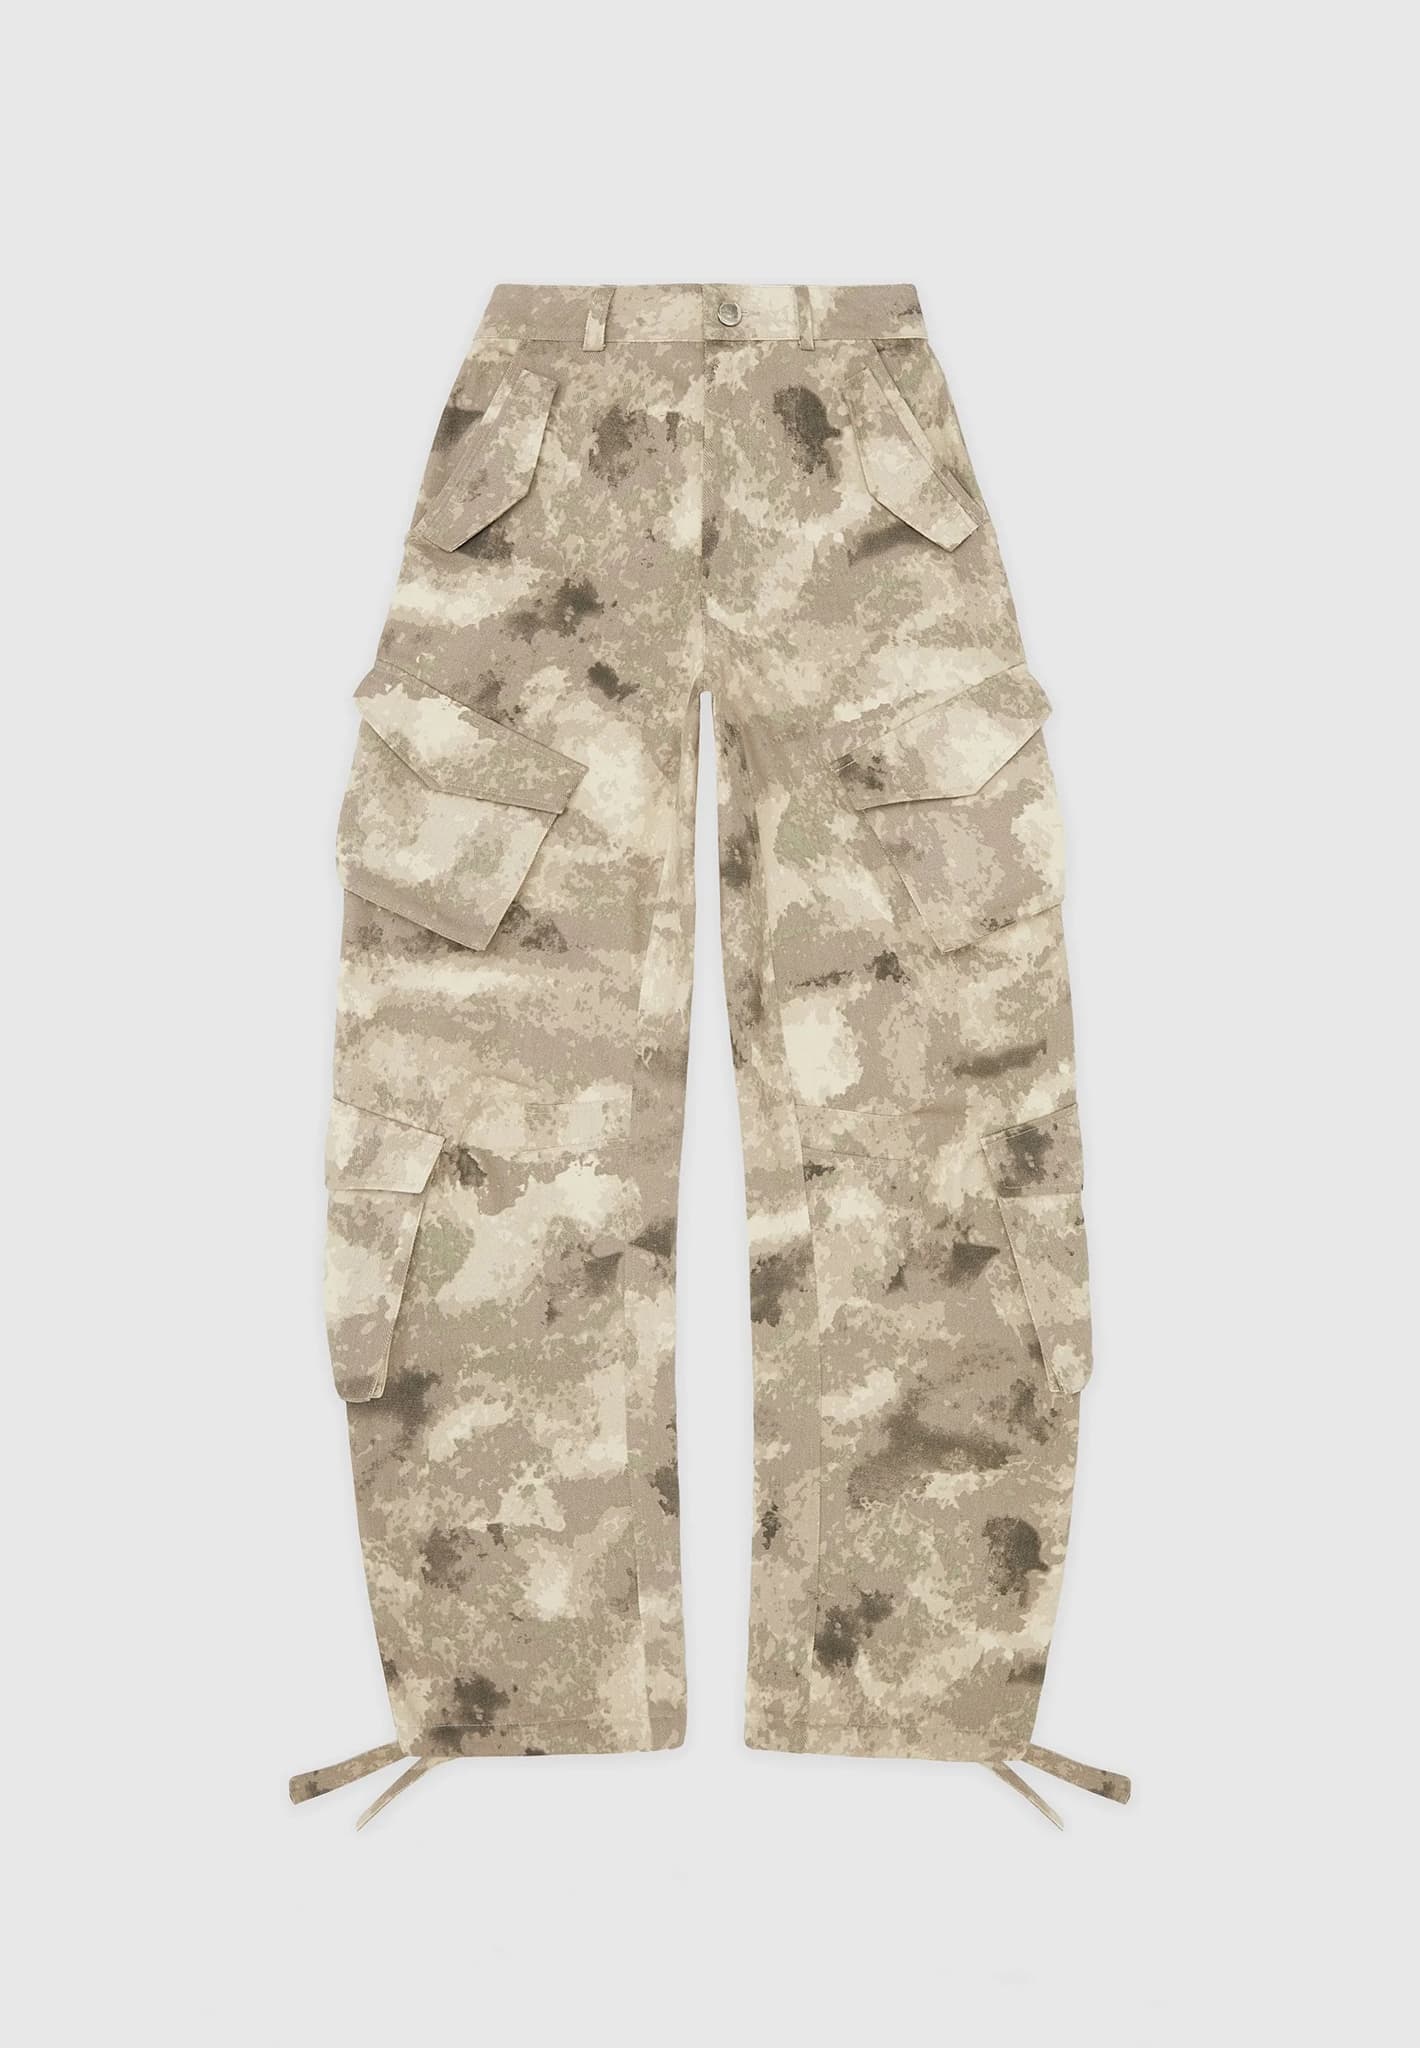 Camouflage Print Tied Detail Cargo Pants High Waist Hip Hop Trousers Pants  Military Army Combat Camouflage Long Pants Hot Capris - AliExpress